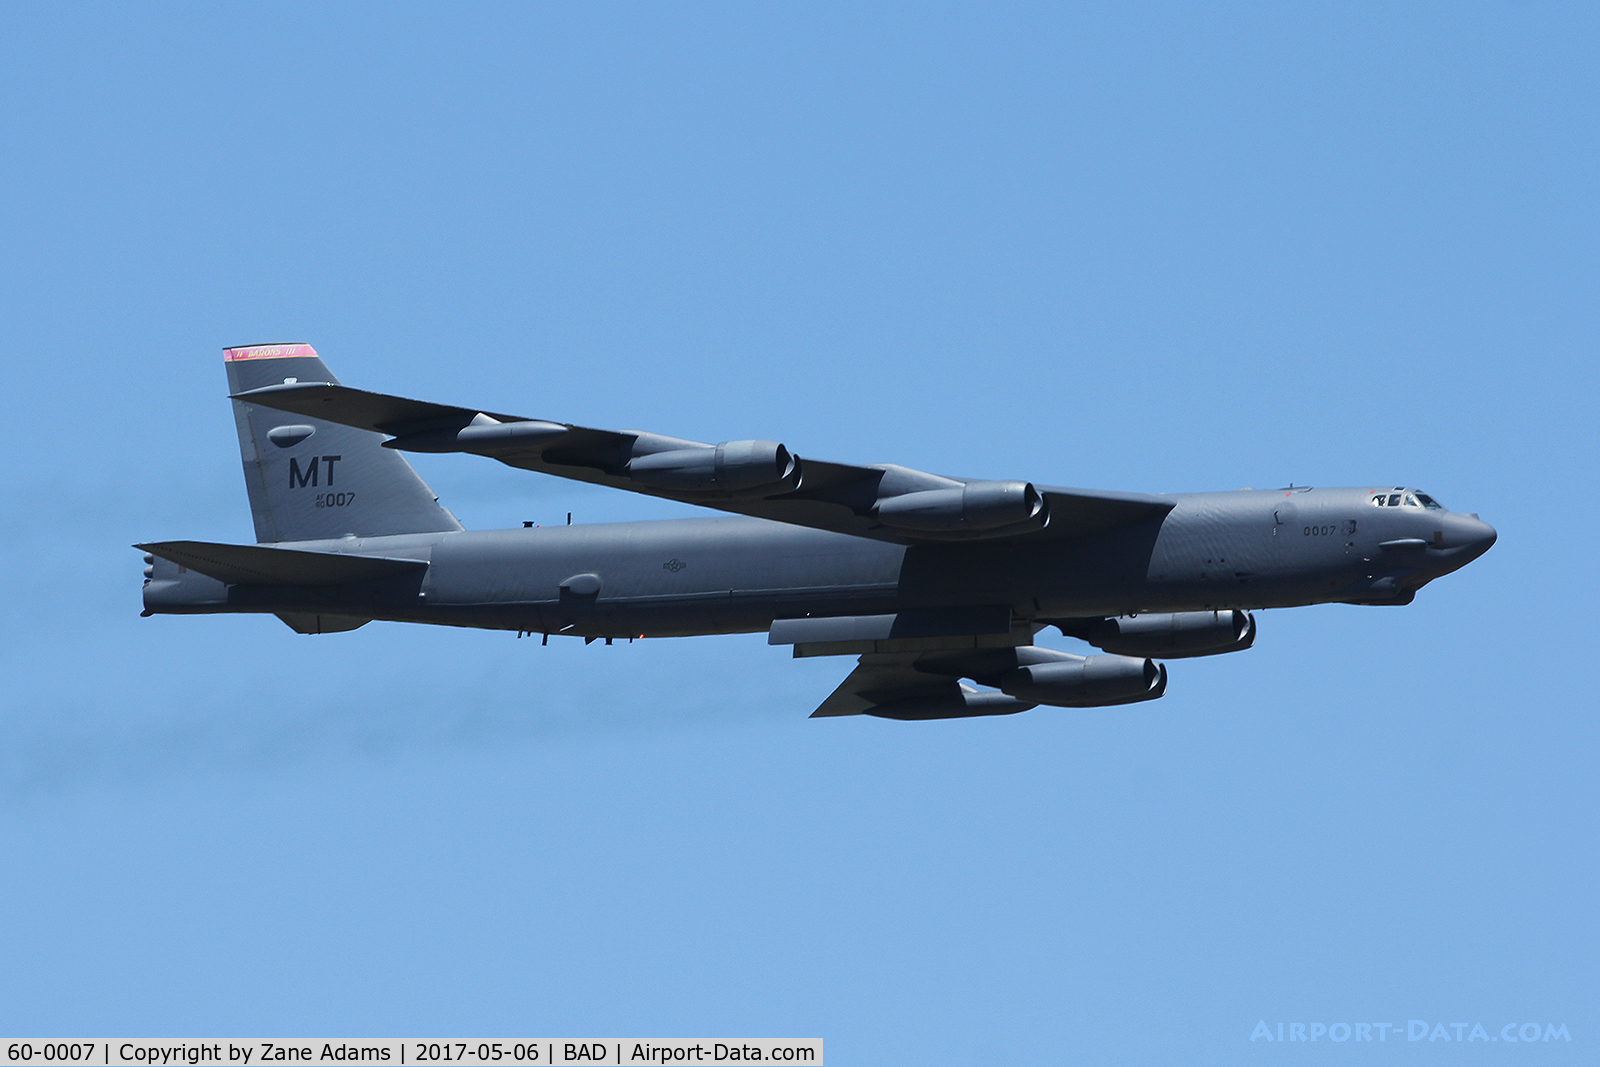 60-0007, 1960 Boeing B-52H Stratofortress C/N 464372, Barksdale AFB 2017 Defenders of Liberty Airshow